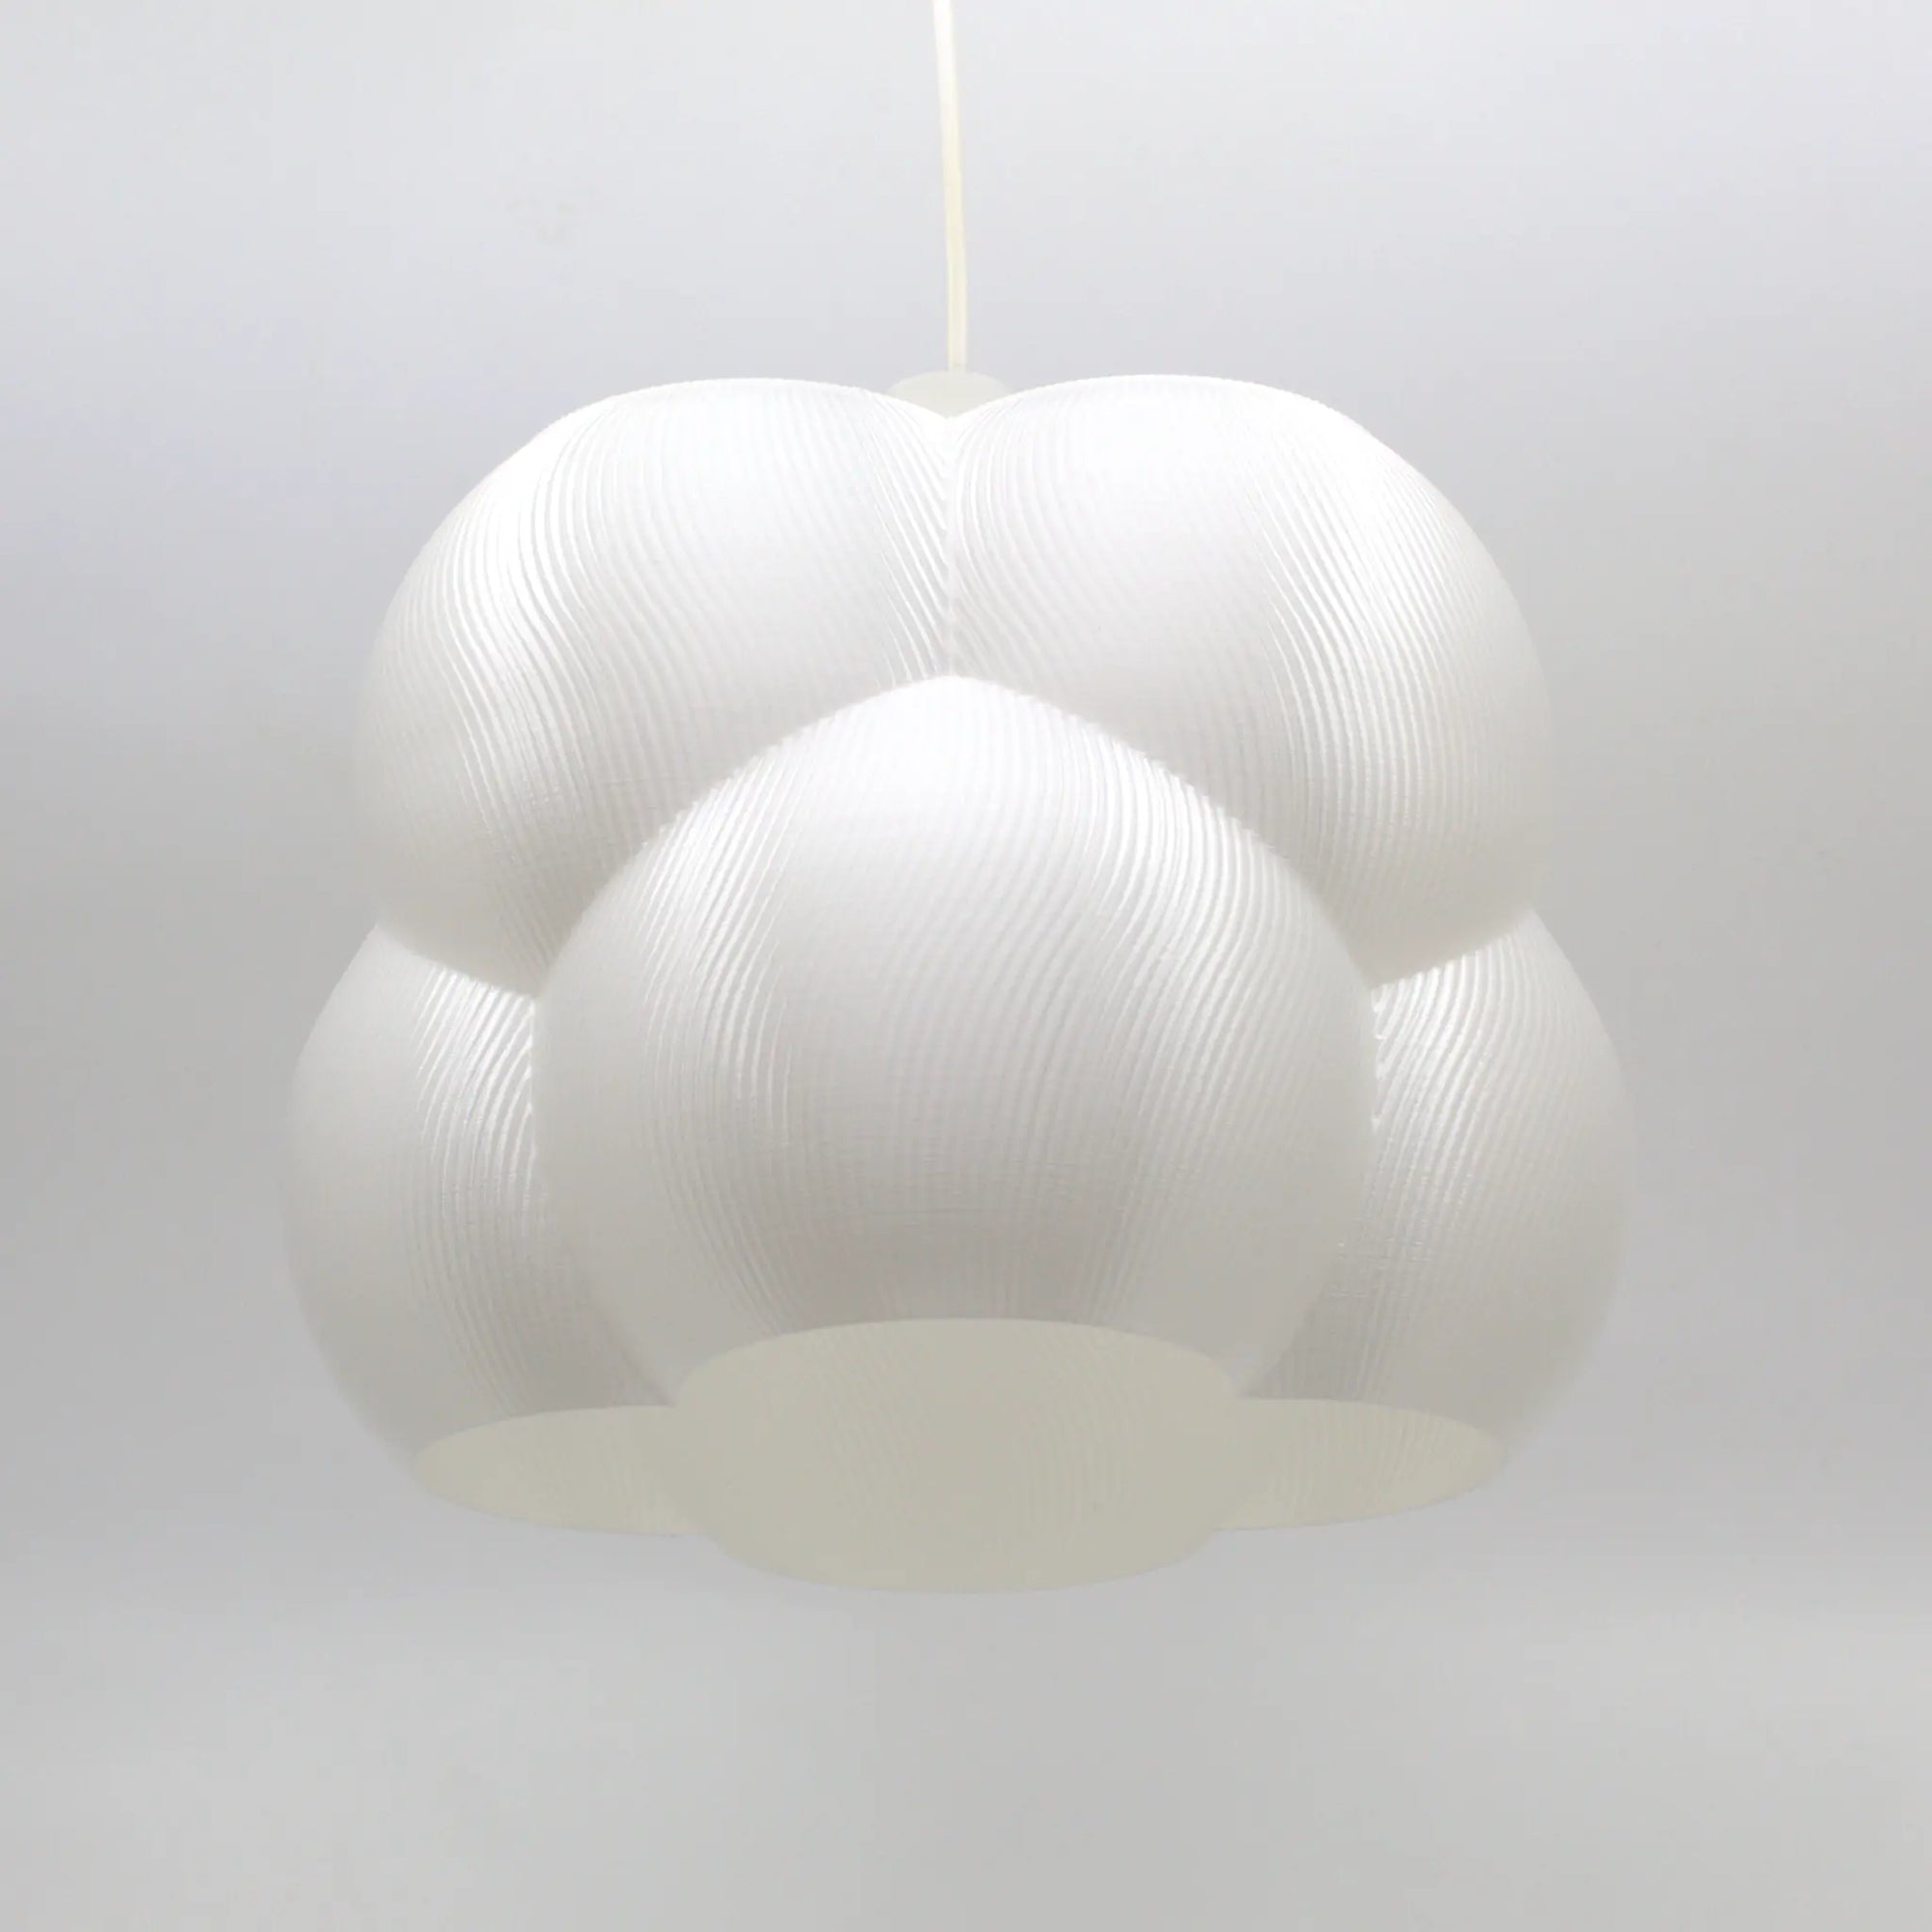 The Cloud Lampshade: Serene & Soft Lighting for a Calm Home